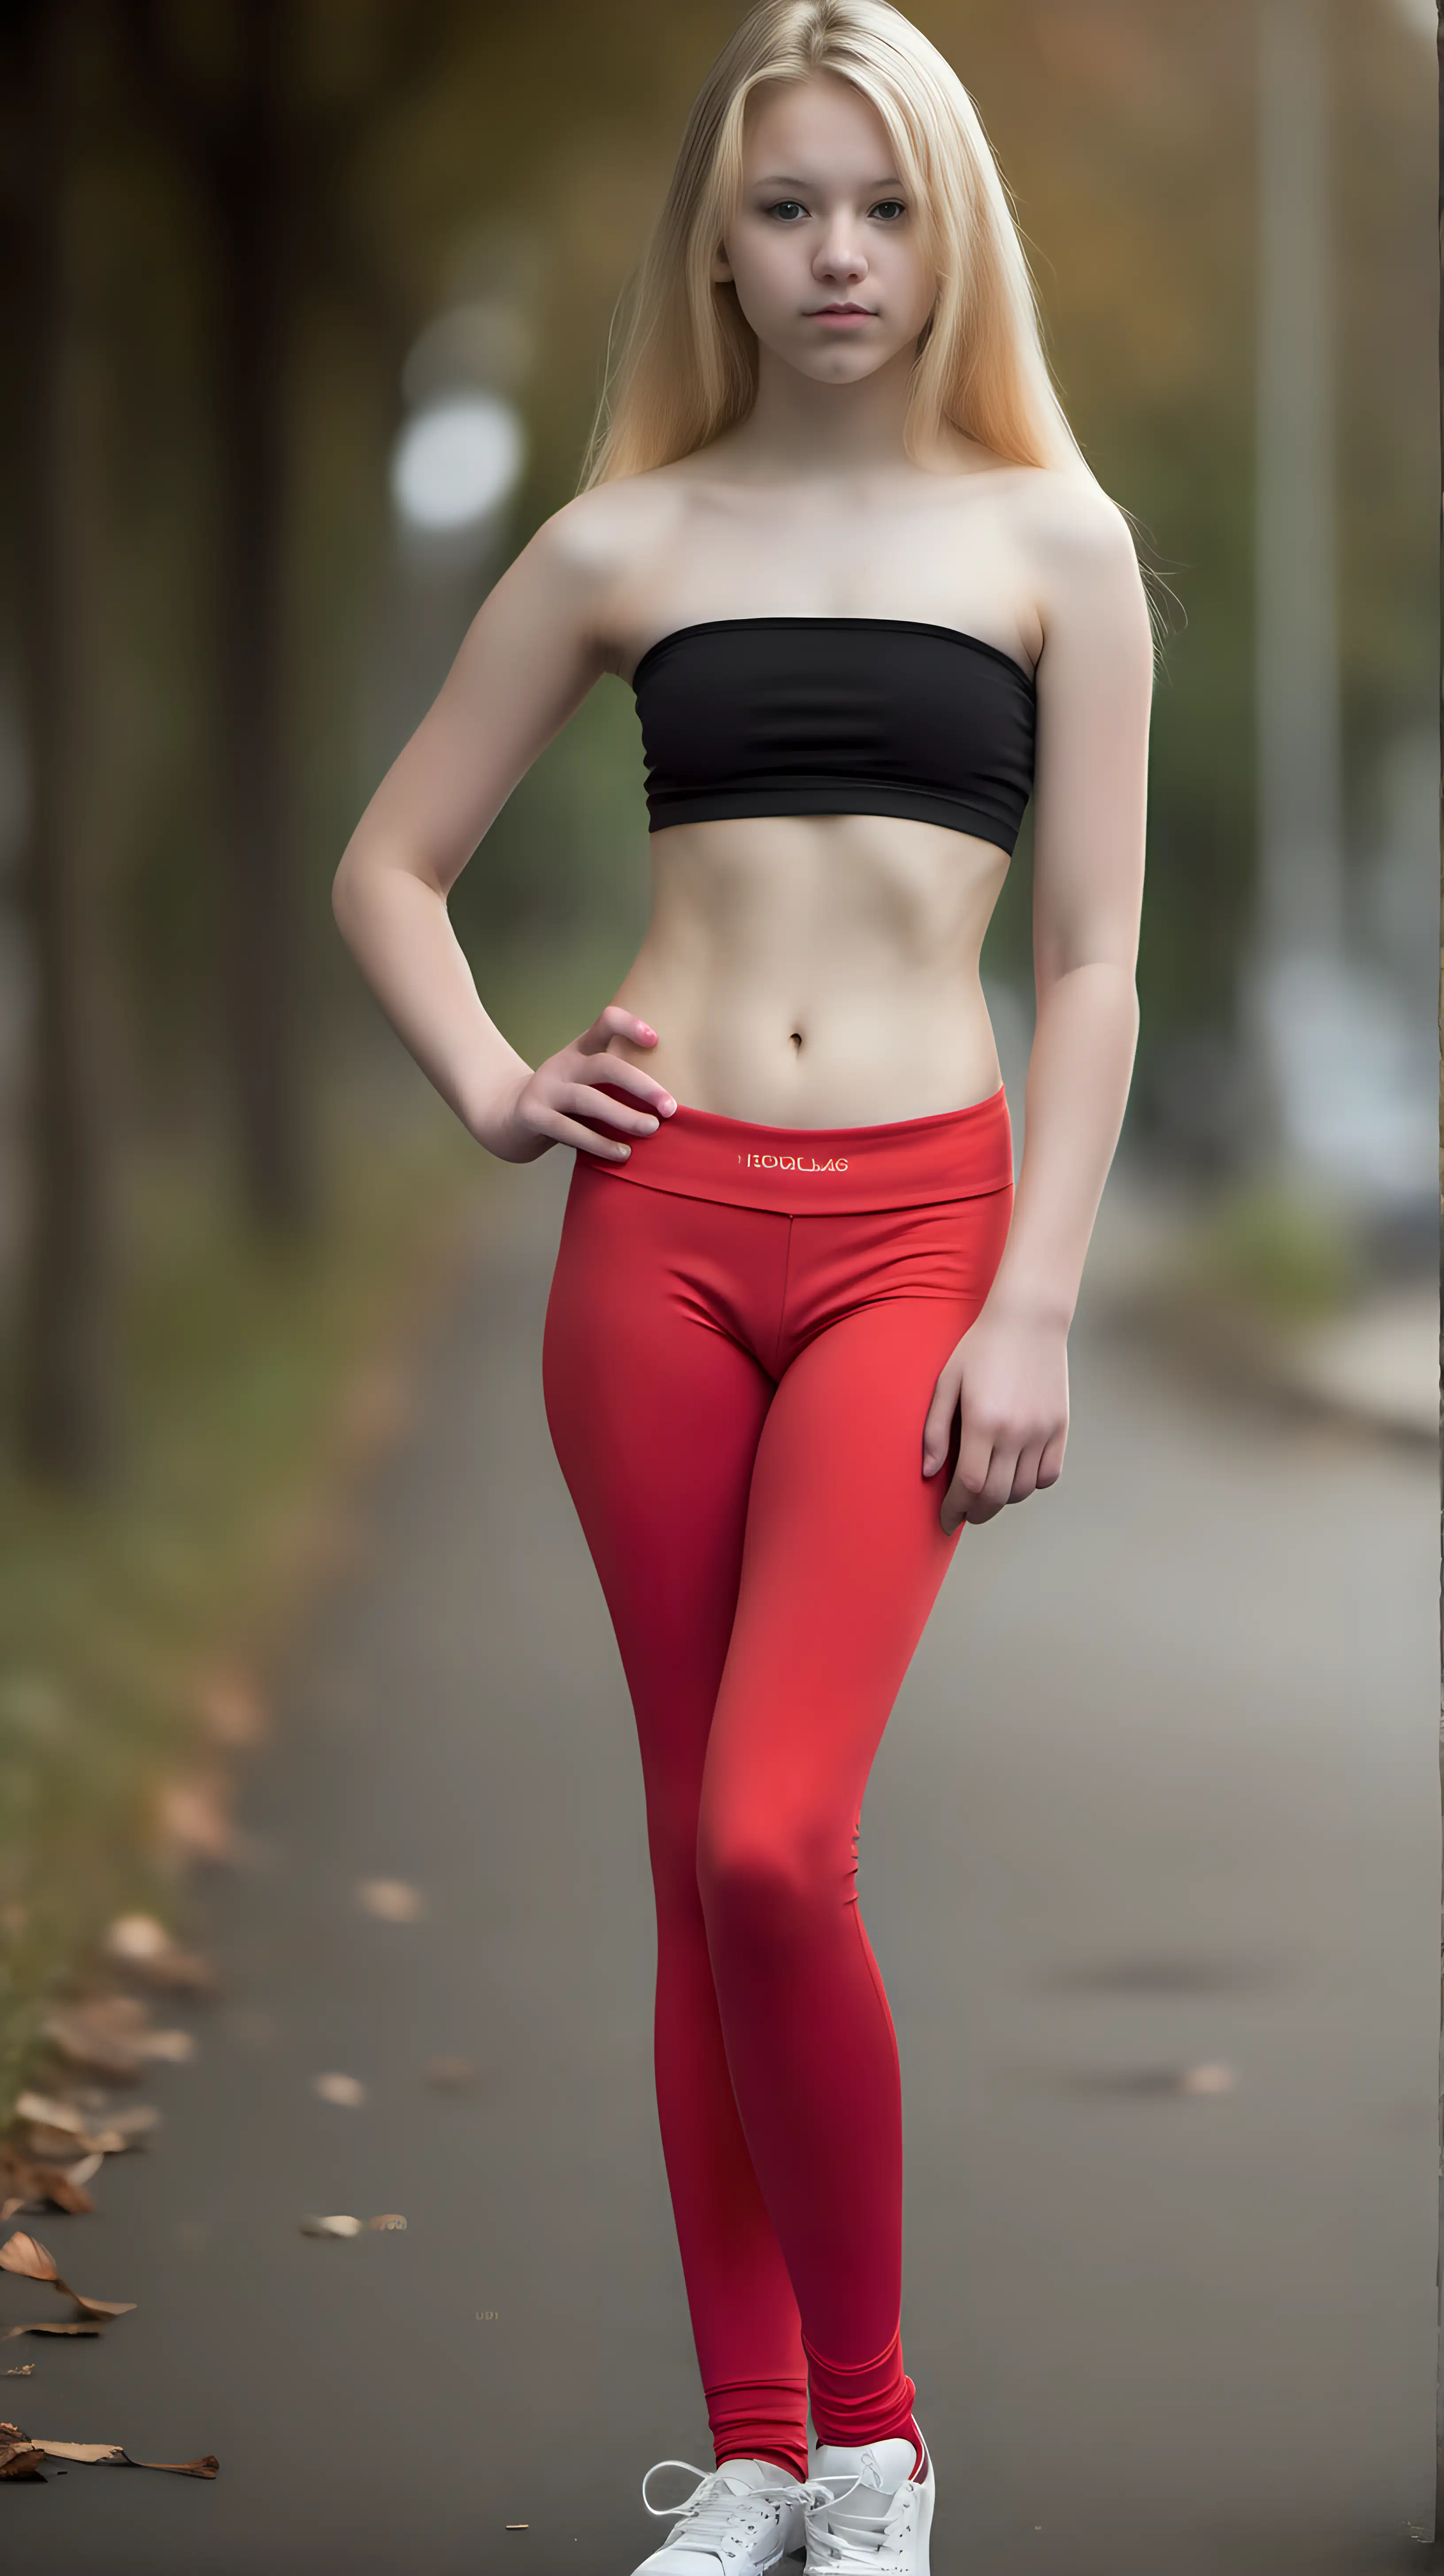 hourglas figure 16yo girl with young face red leggings topless blond hair